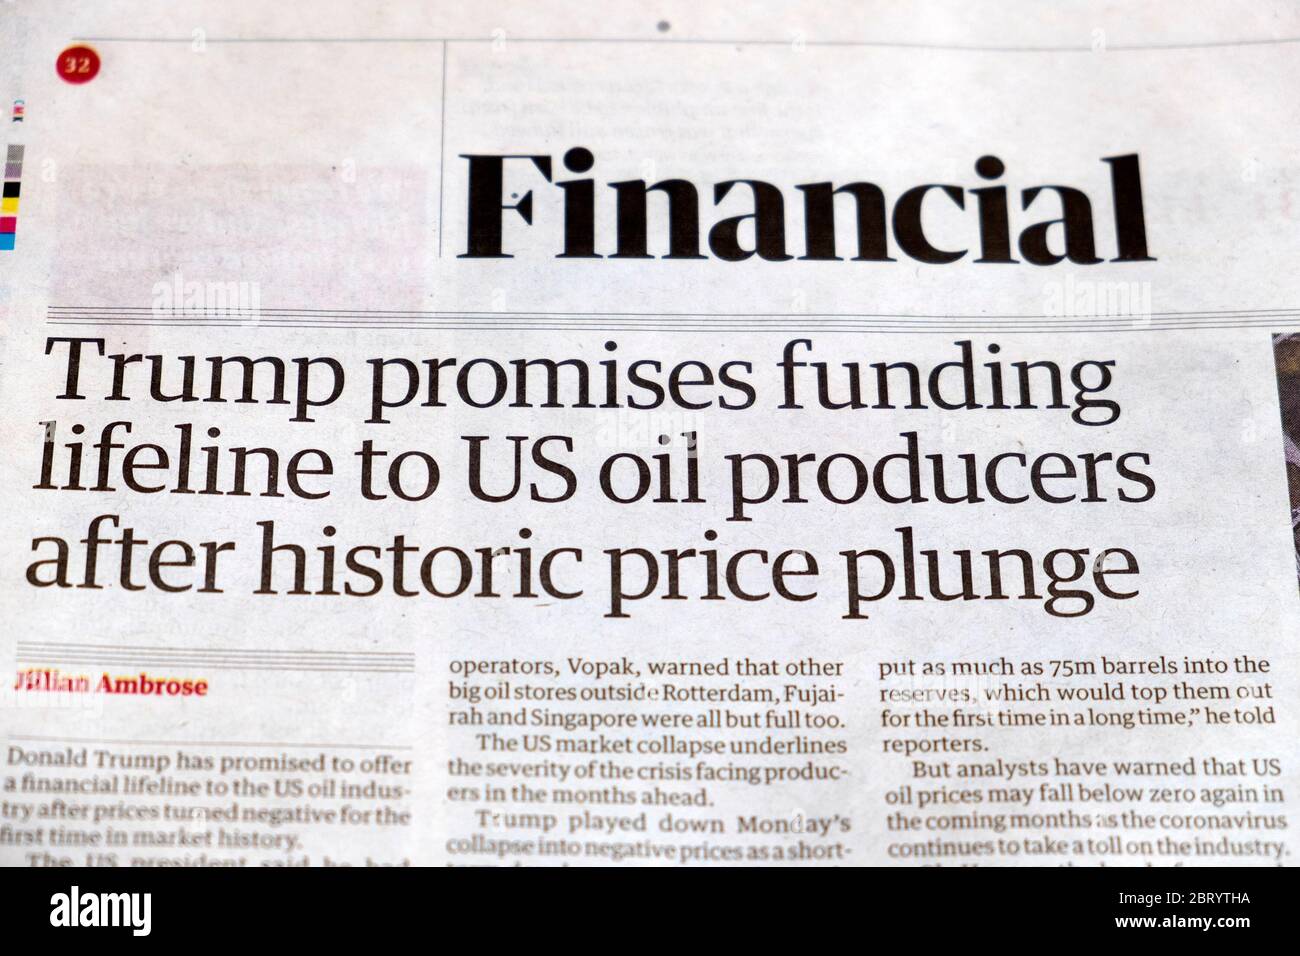 'Trump promises funding lifeline to US oil producers after historic price plunge' Financial newspaper headline in Guardian 21 April 2020 London UK Stock Photo